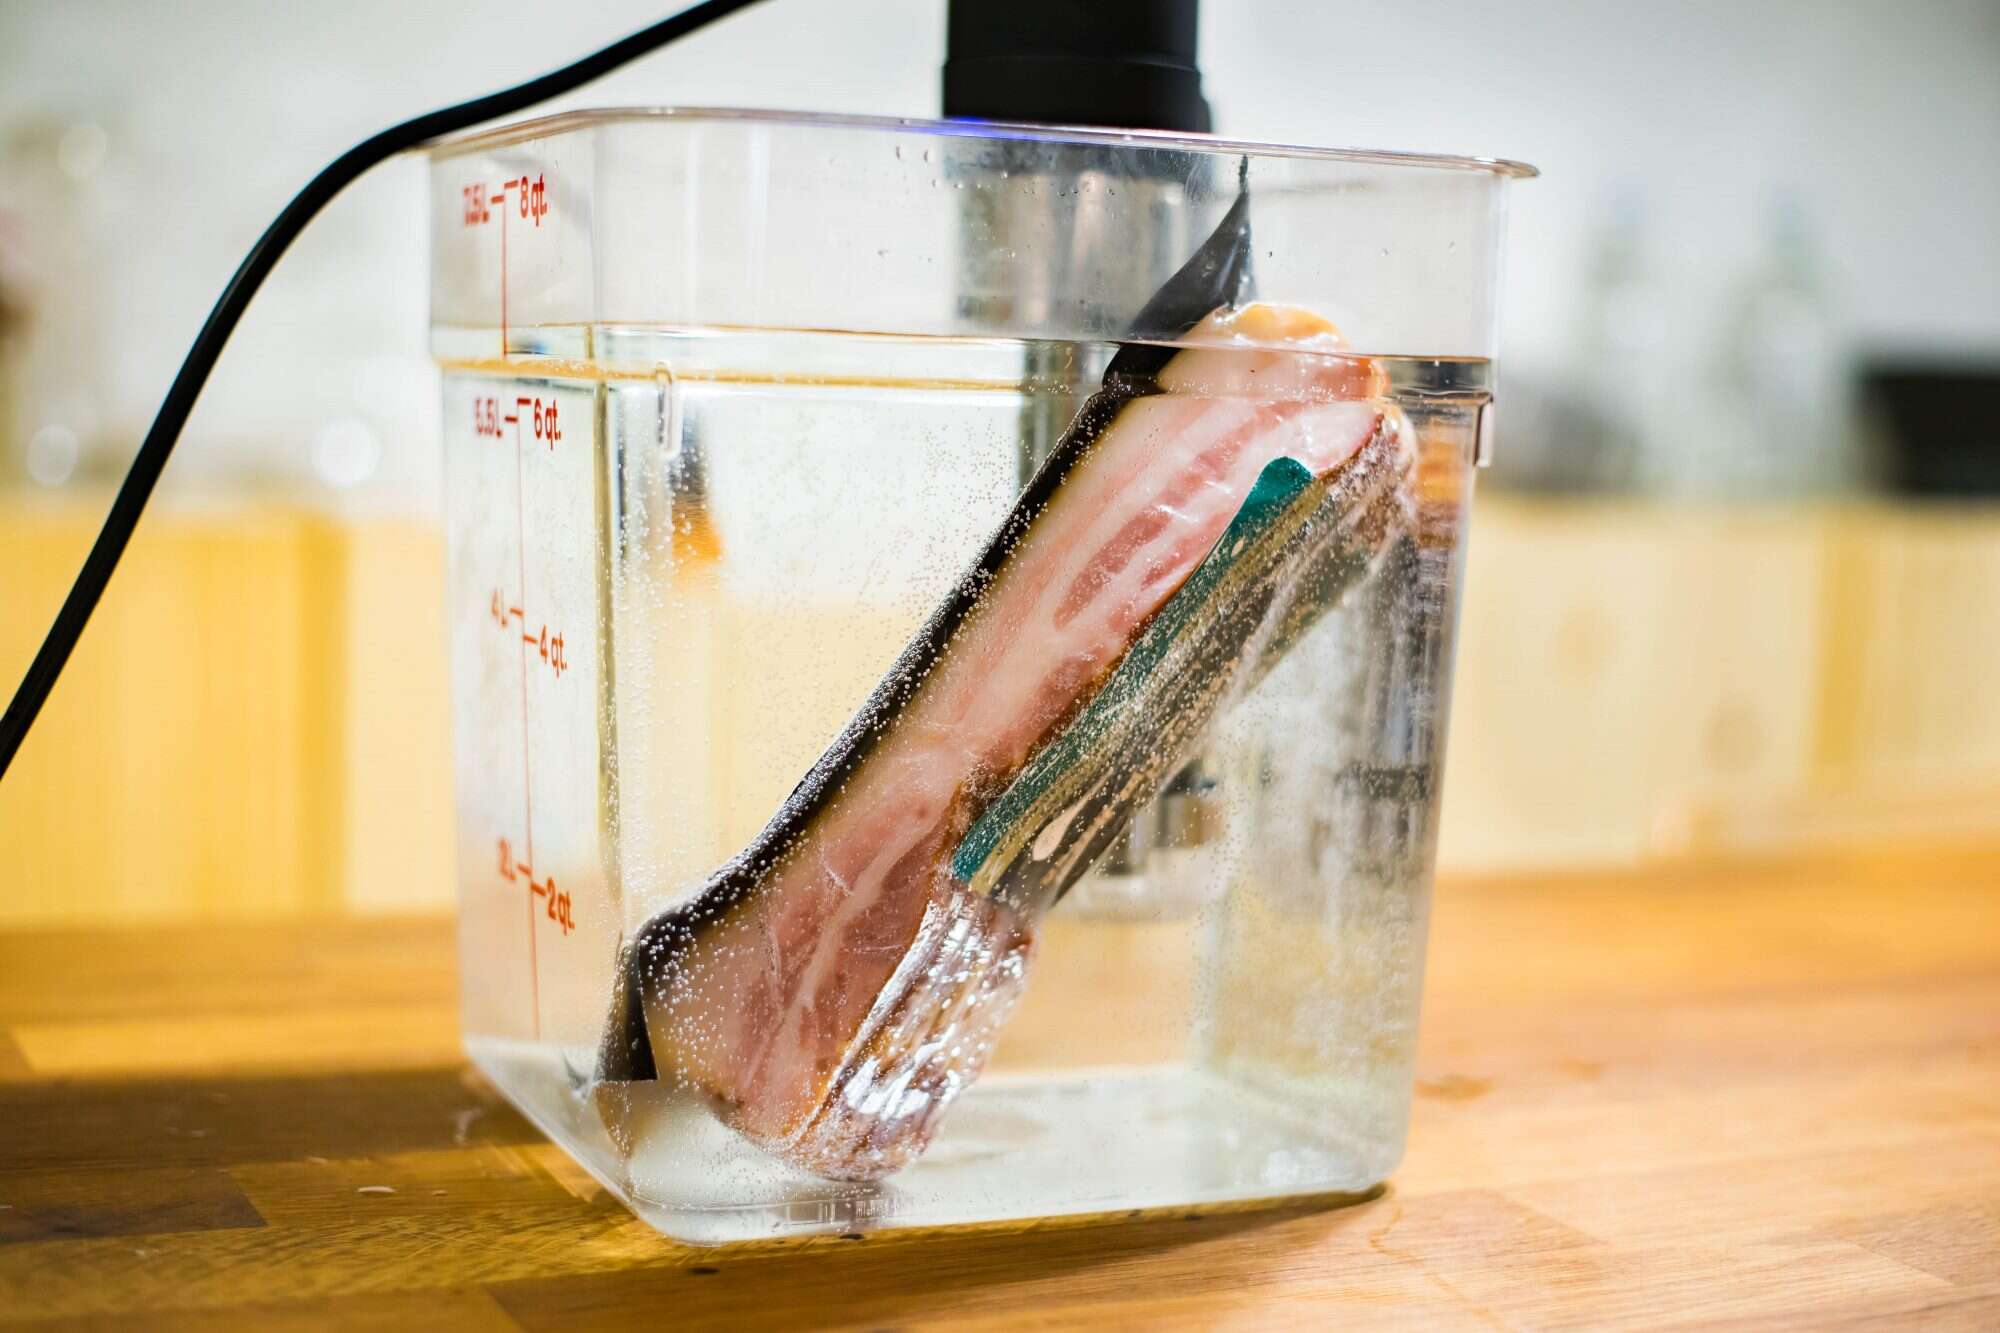 Sous Vide Bacon Is Crispy Tender at the Time | MyRecipes